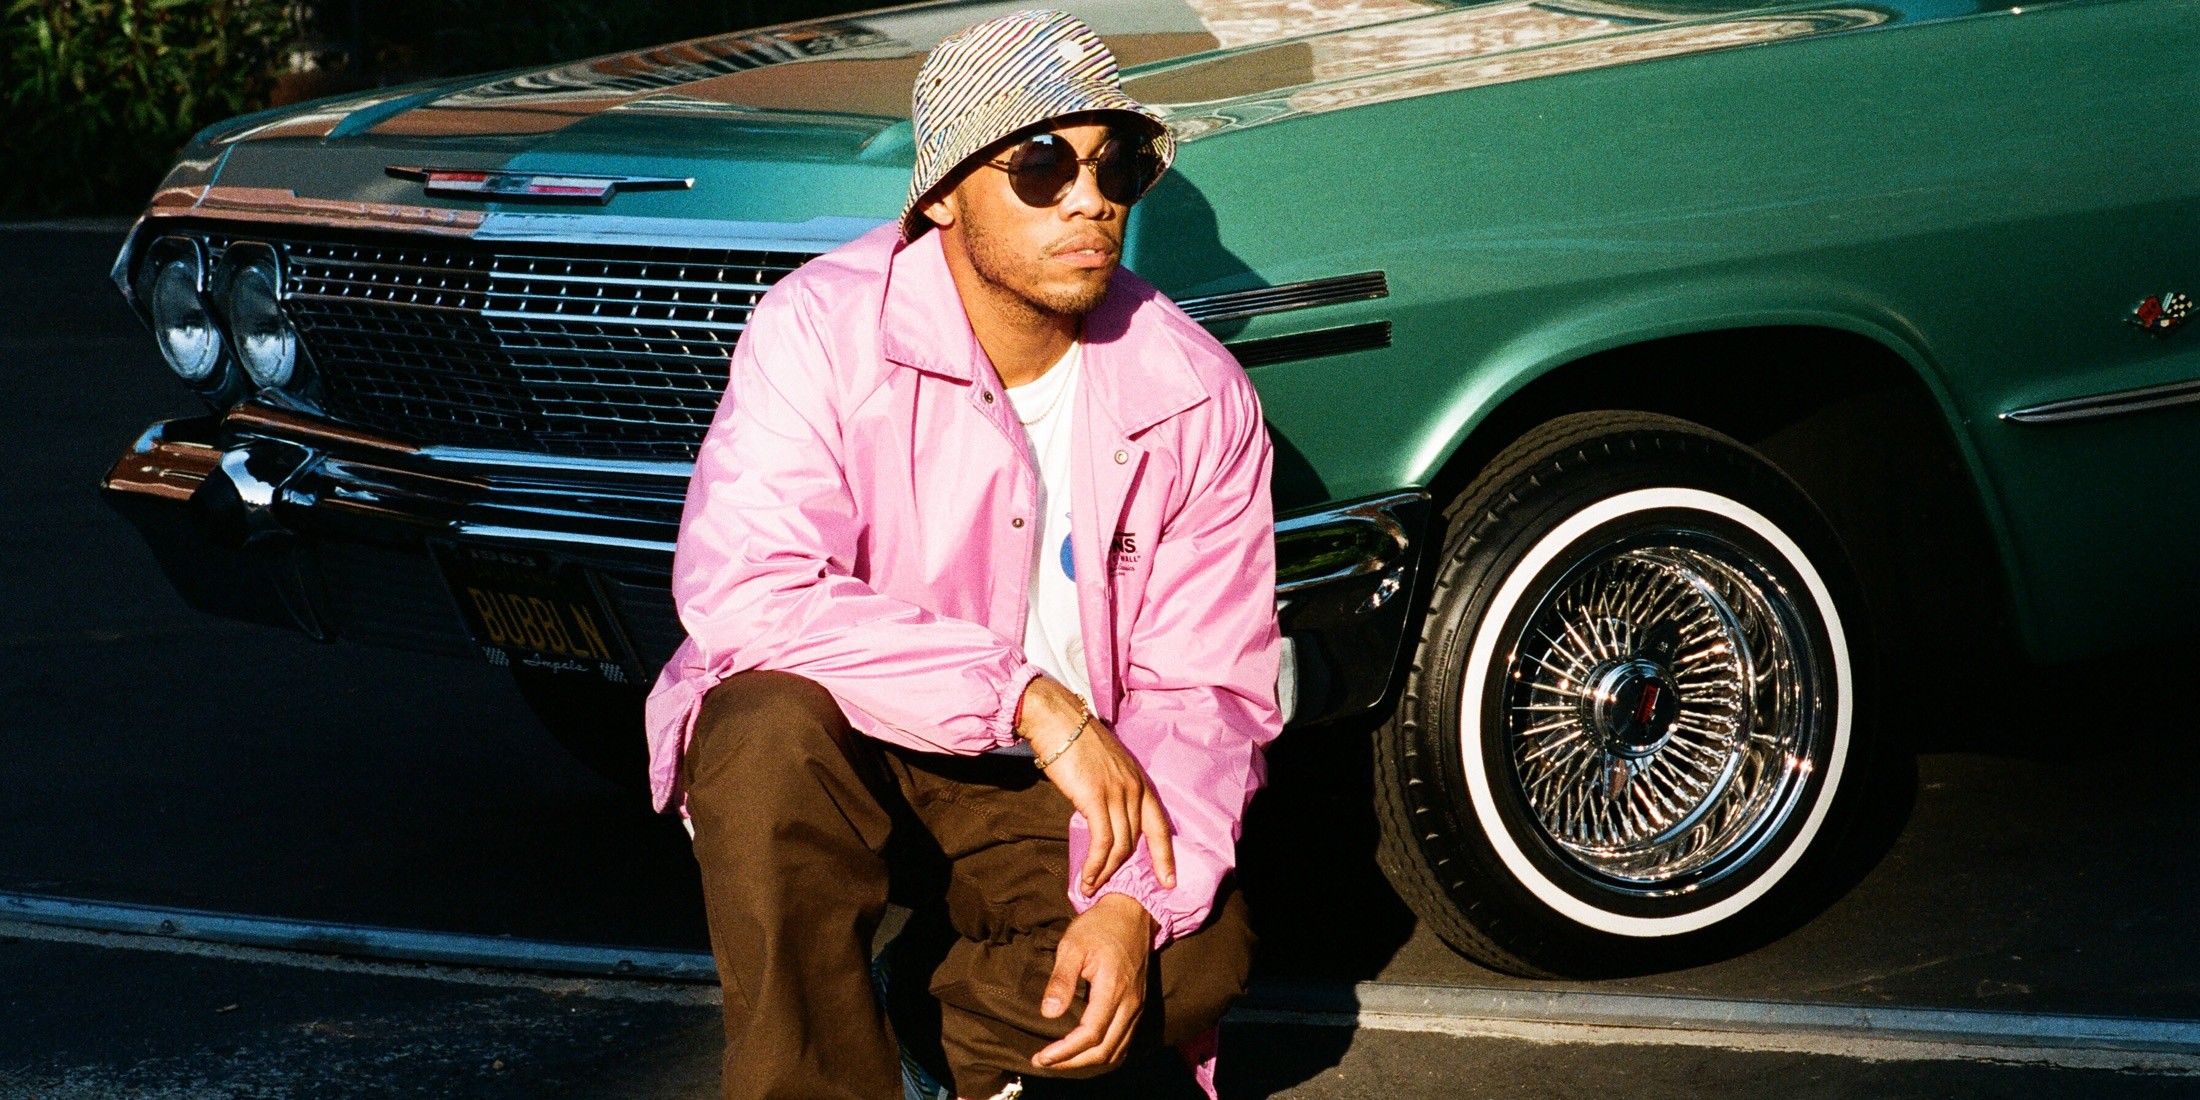 Anderson .Paak announced as Vans’ first Global Music Ambassador with exclusive Vans collection